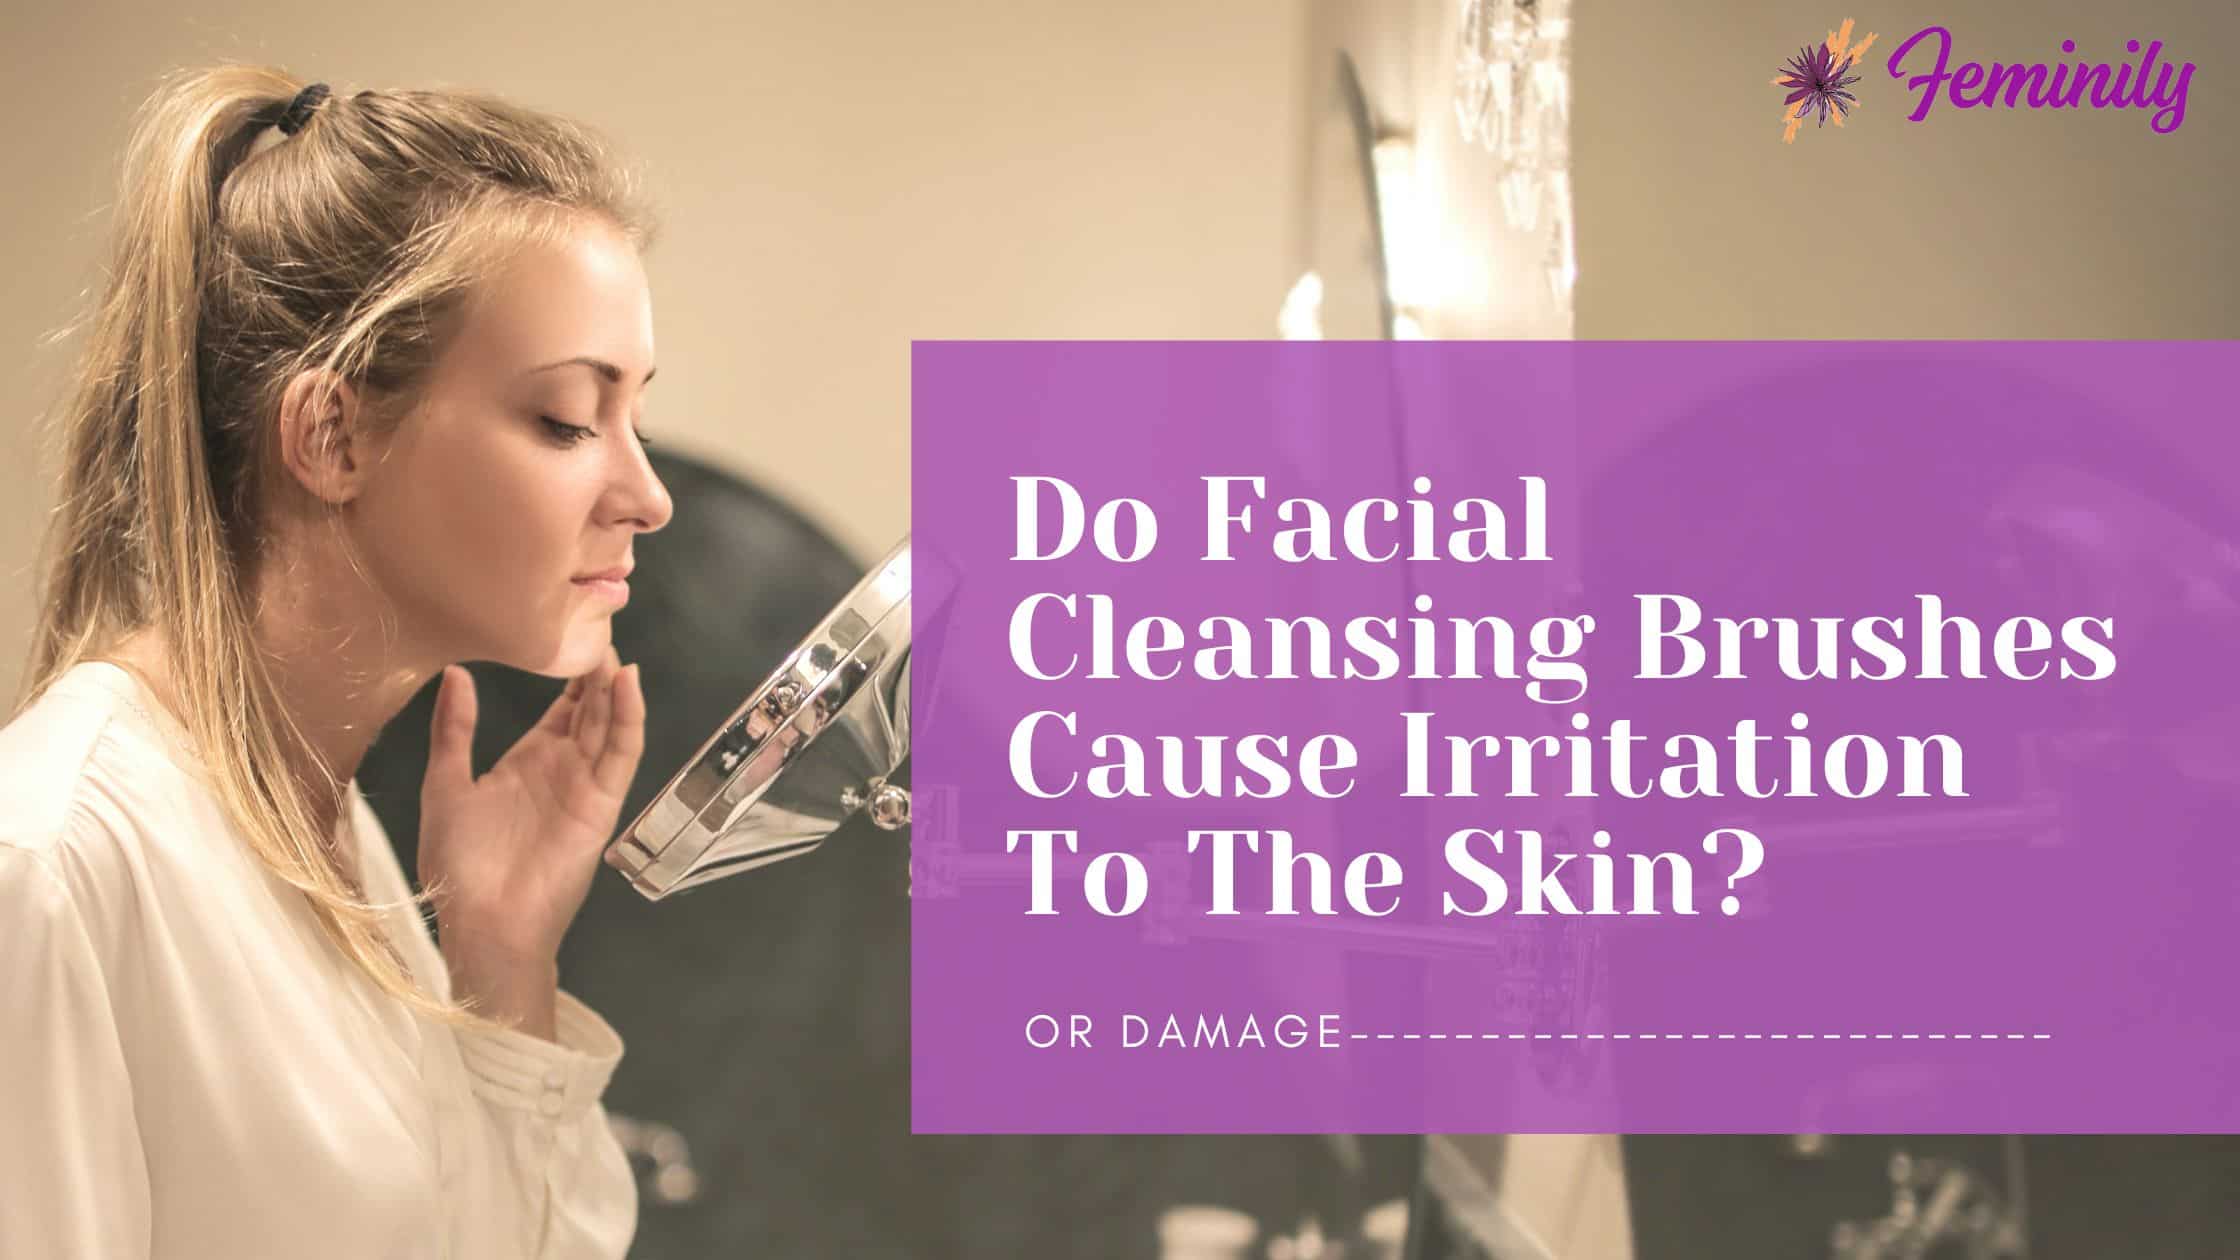 Do facial cleansing brushes cause irritation or damage to the skin